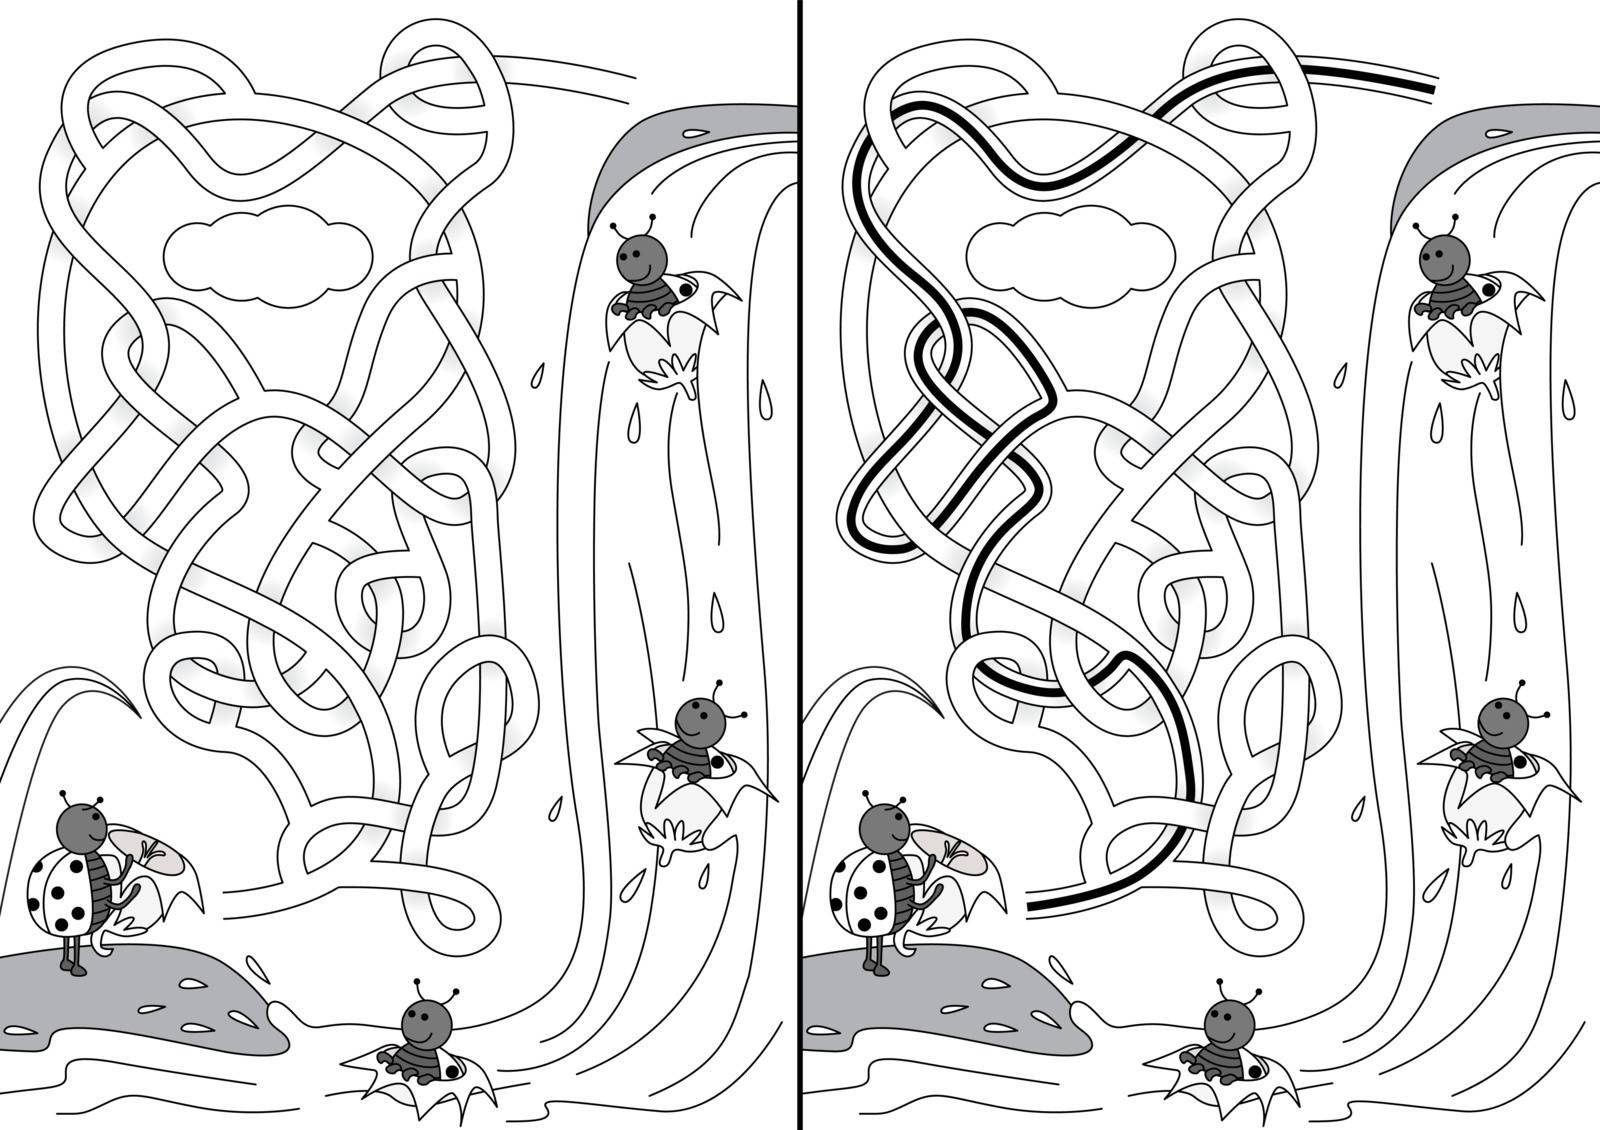 Ladybugs coming down a waterfall in flowers - maze for kids with a solution in black and white